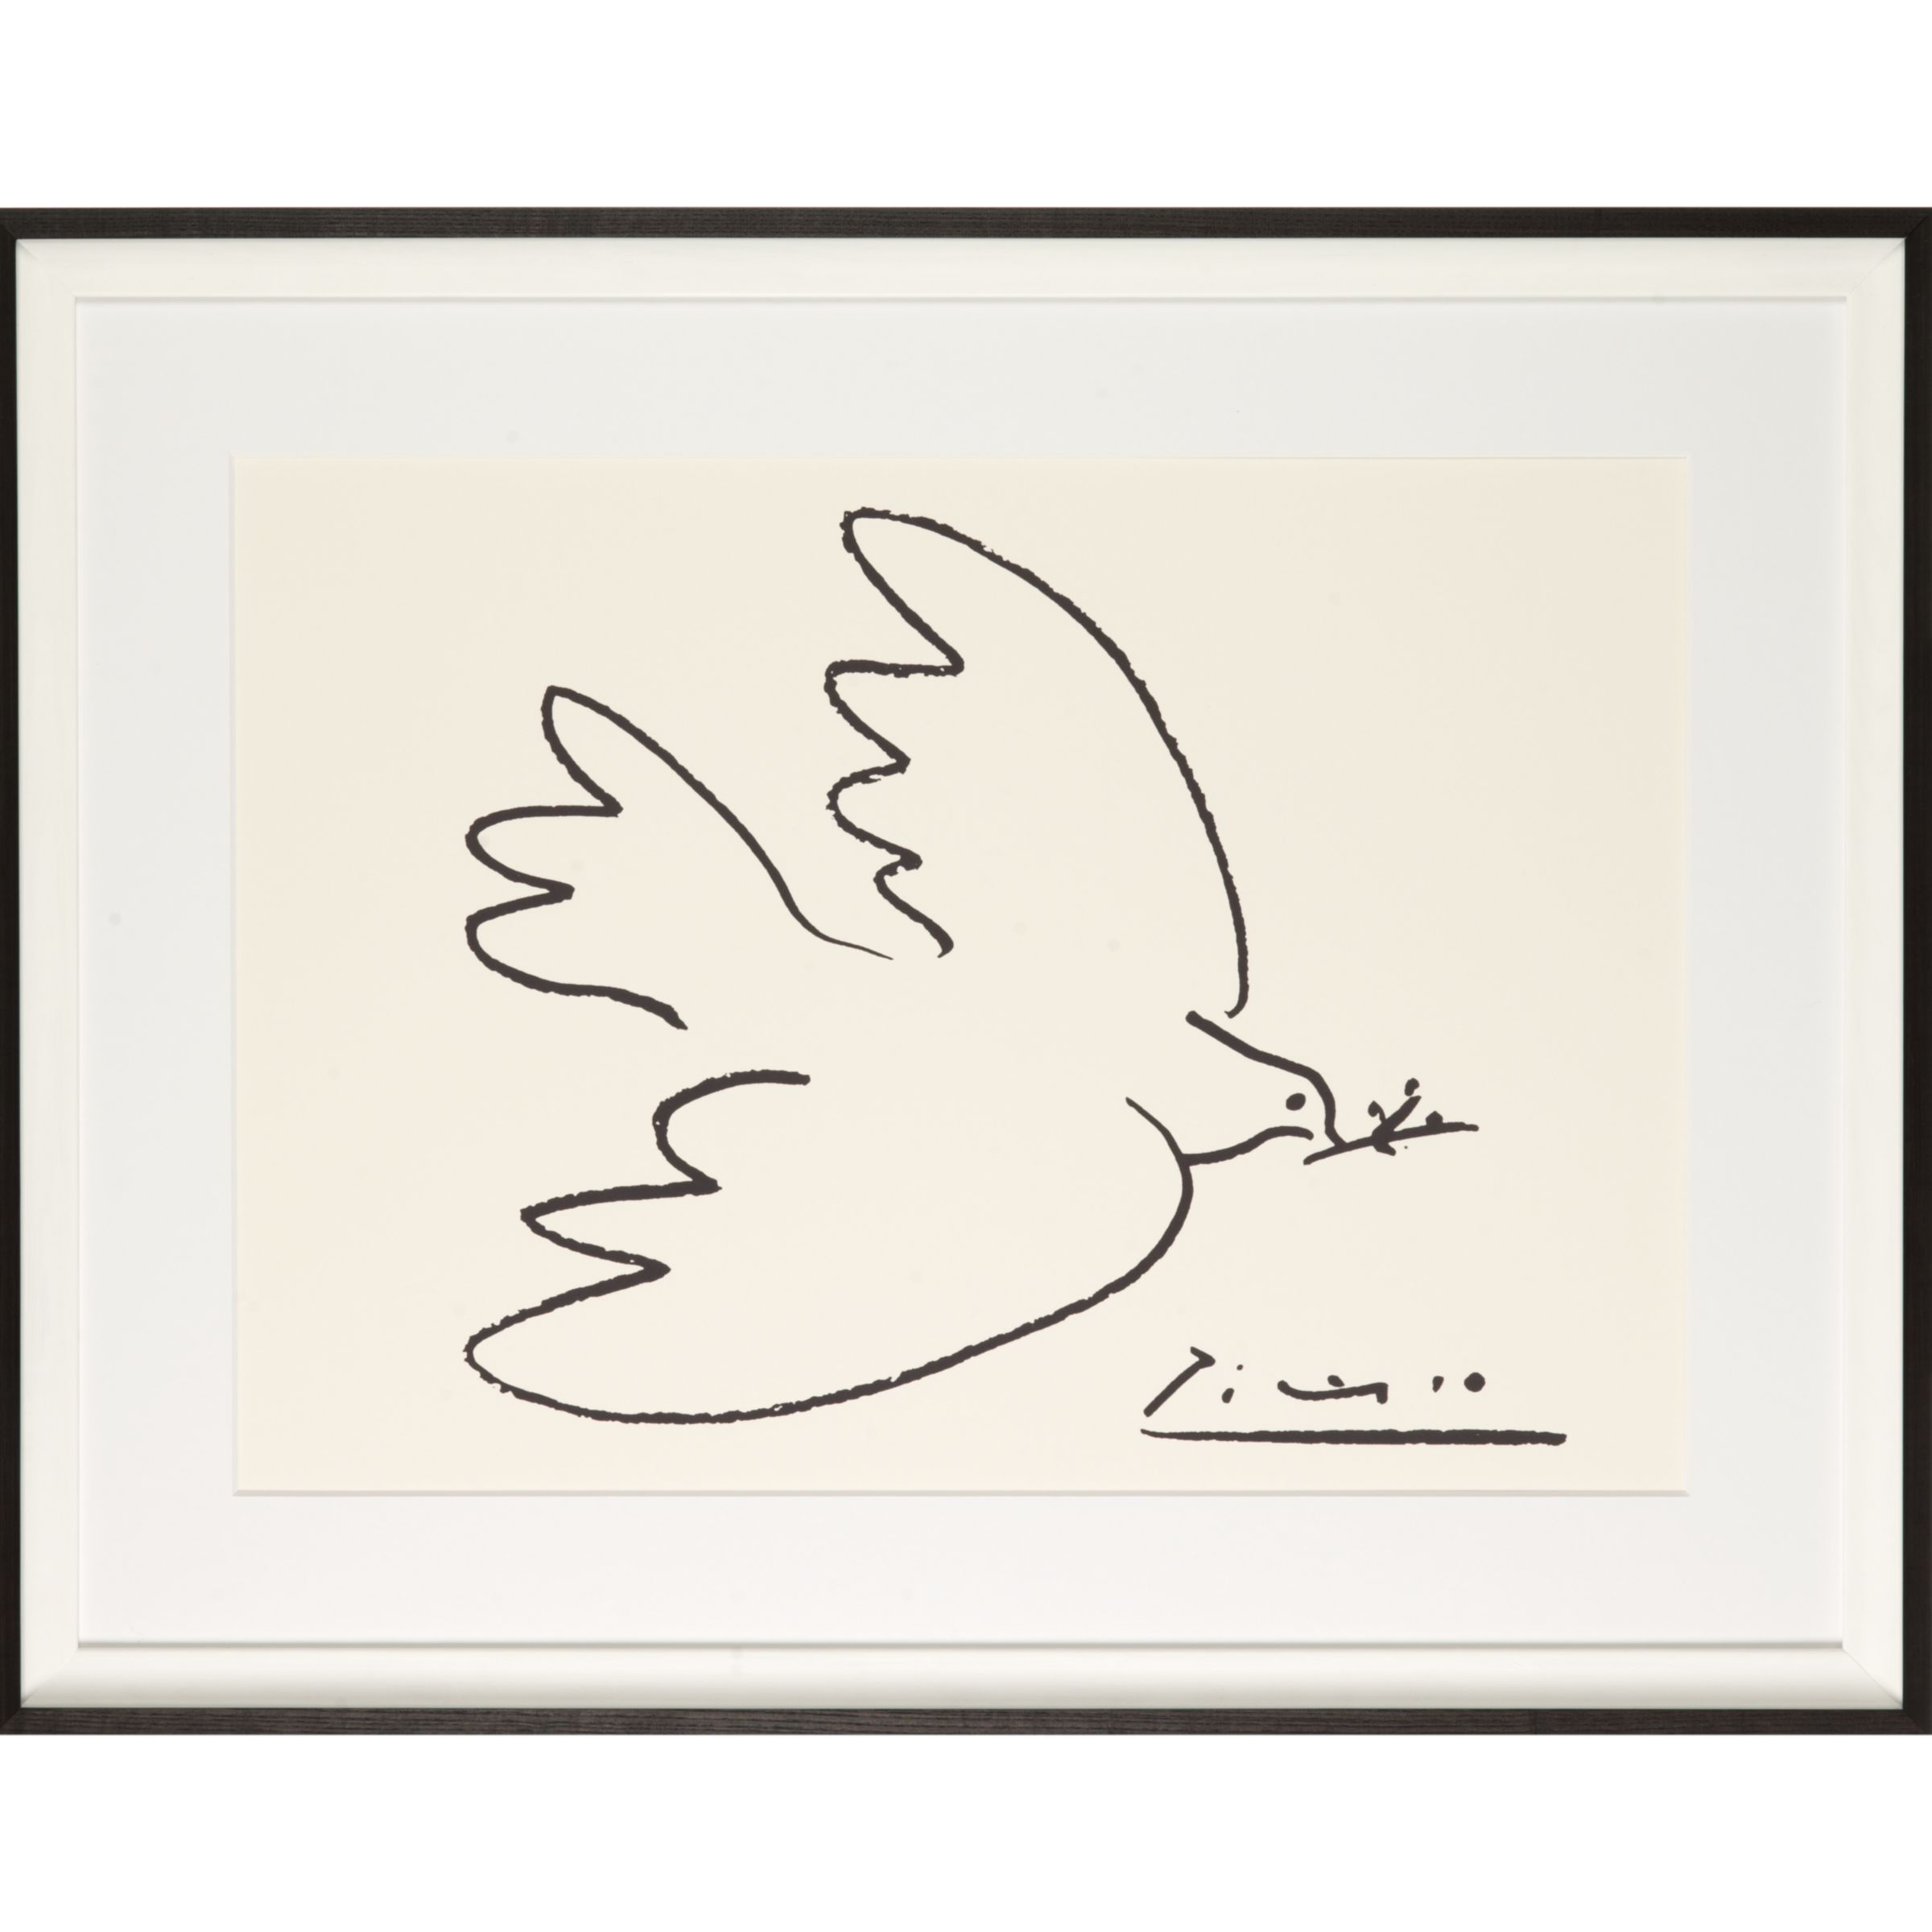 Picasso 'Dove of Peace' Framed Print, 74 x 94cm at John Lewis